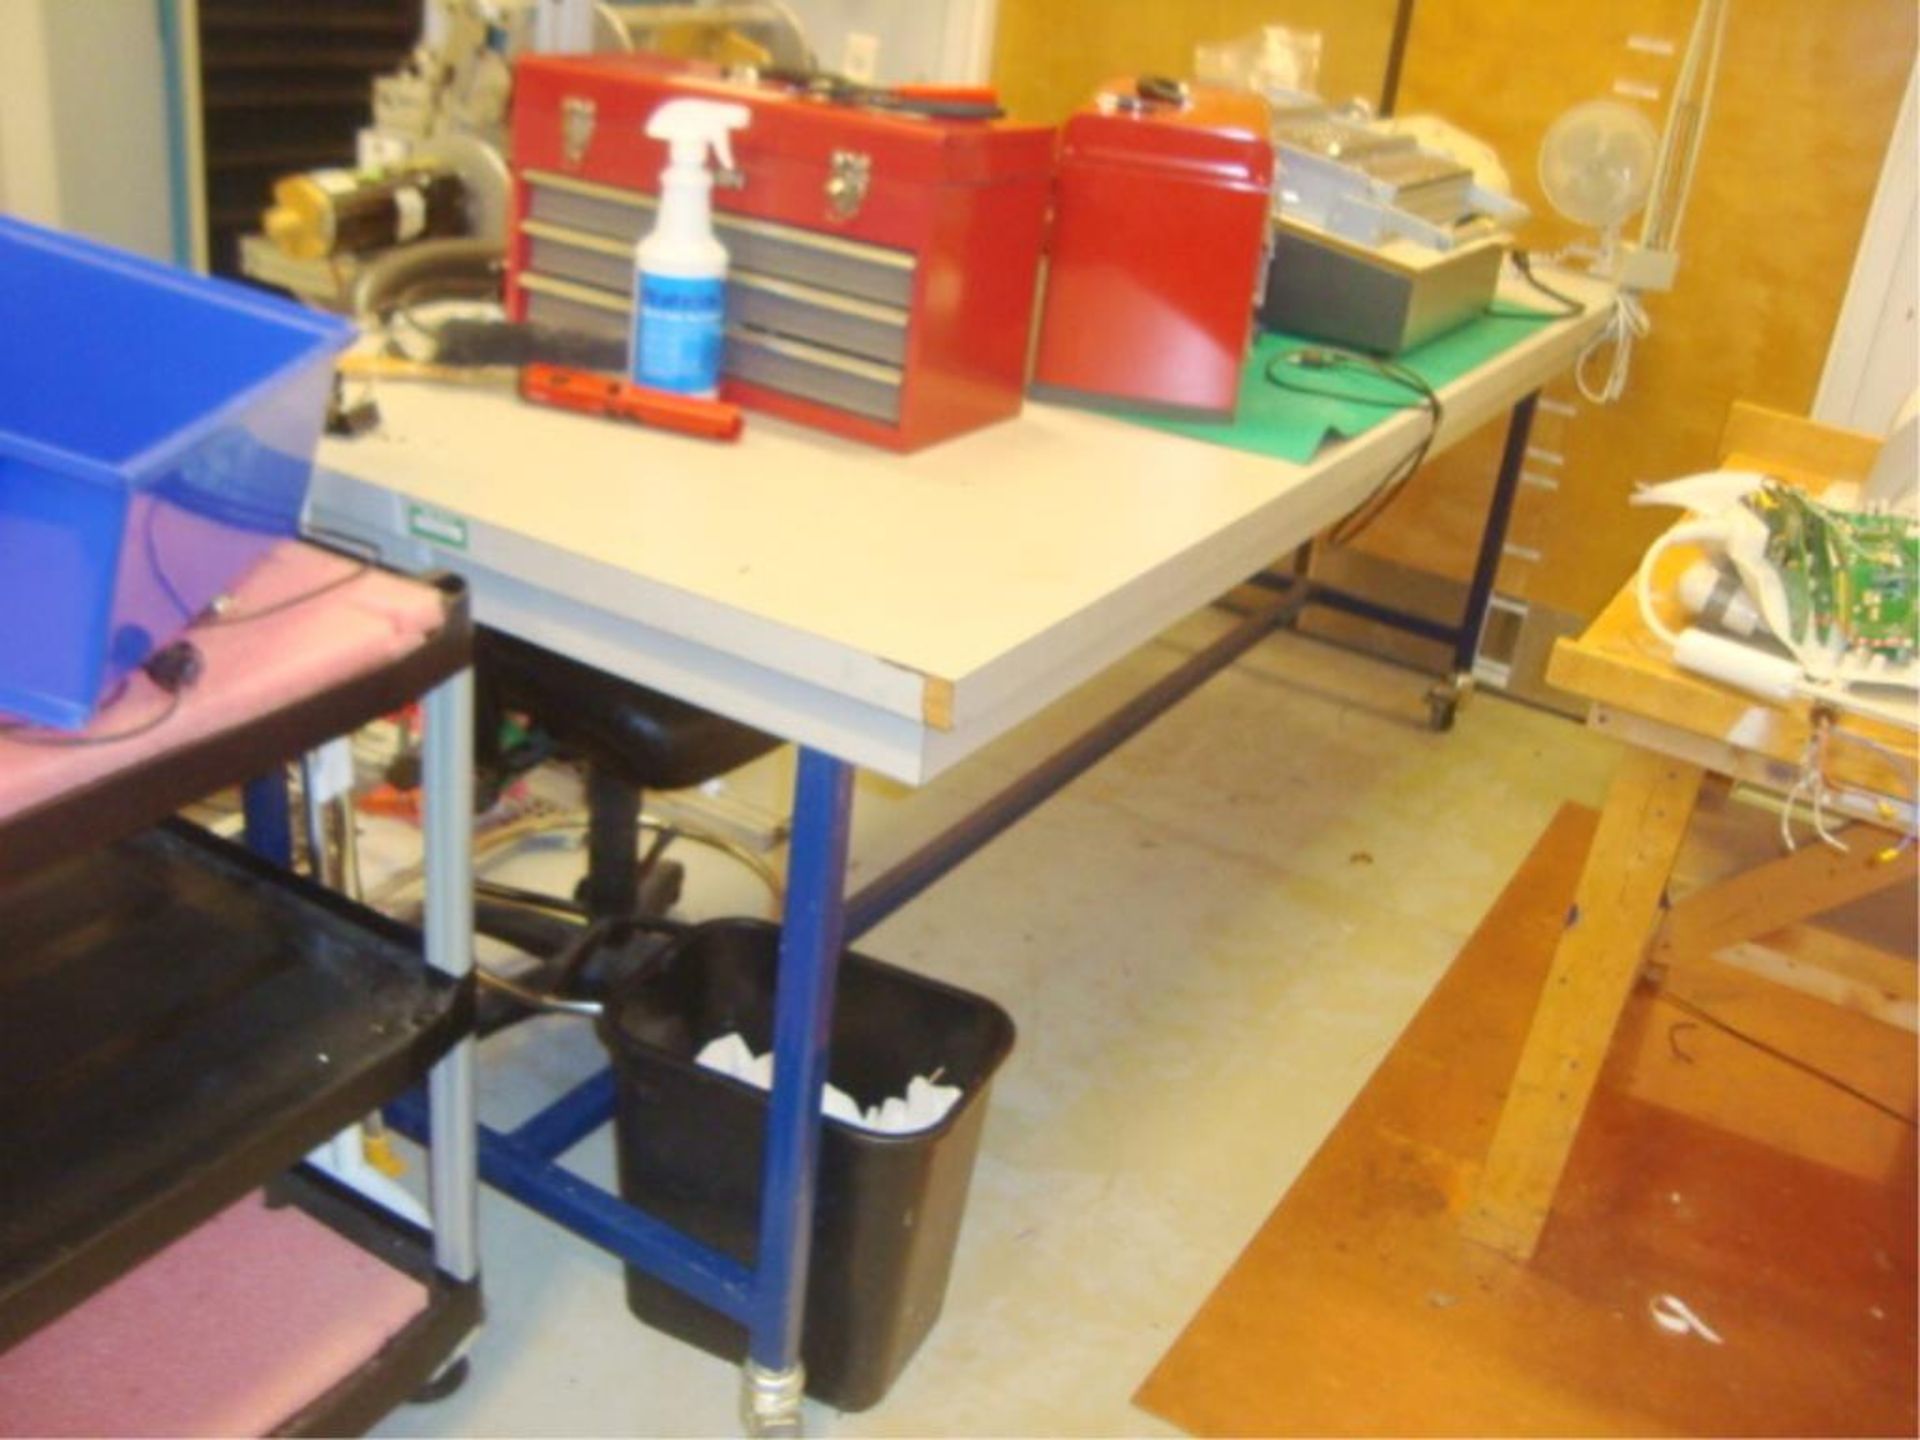 Workstation Benches & Rack - Image 4 of 6